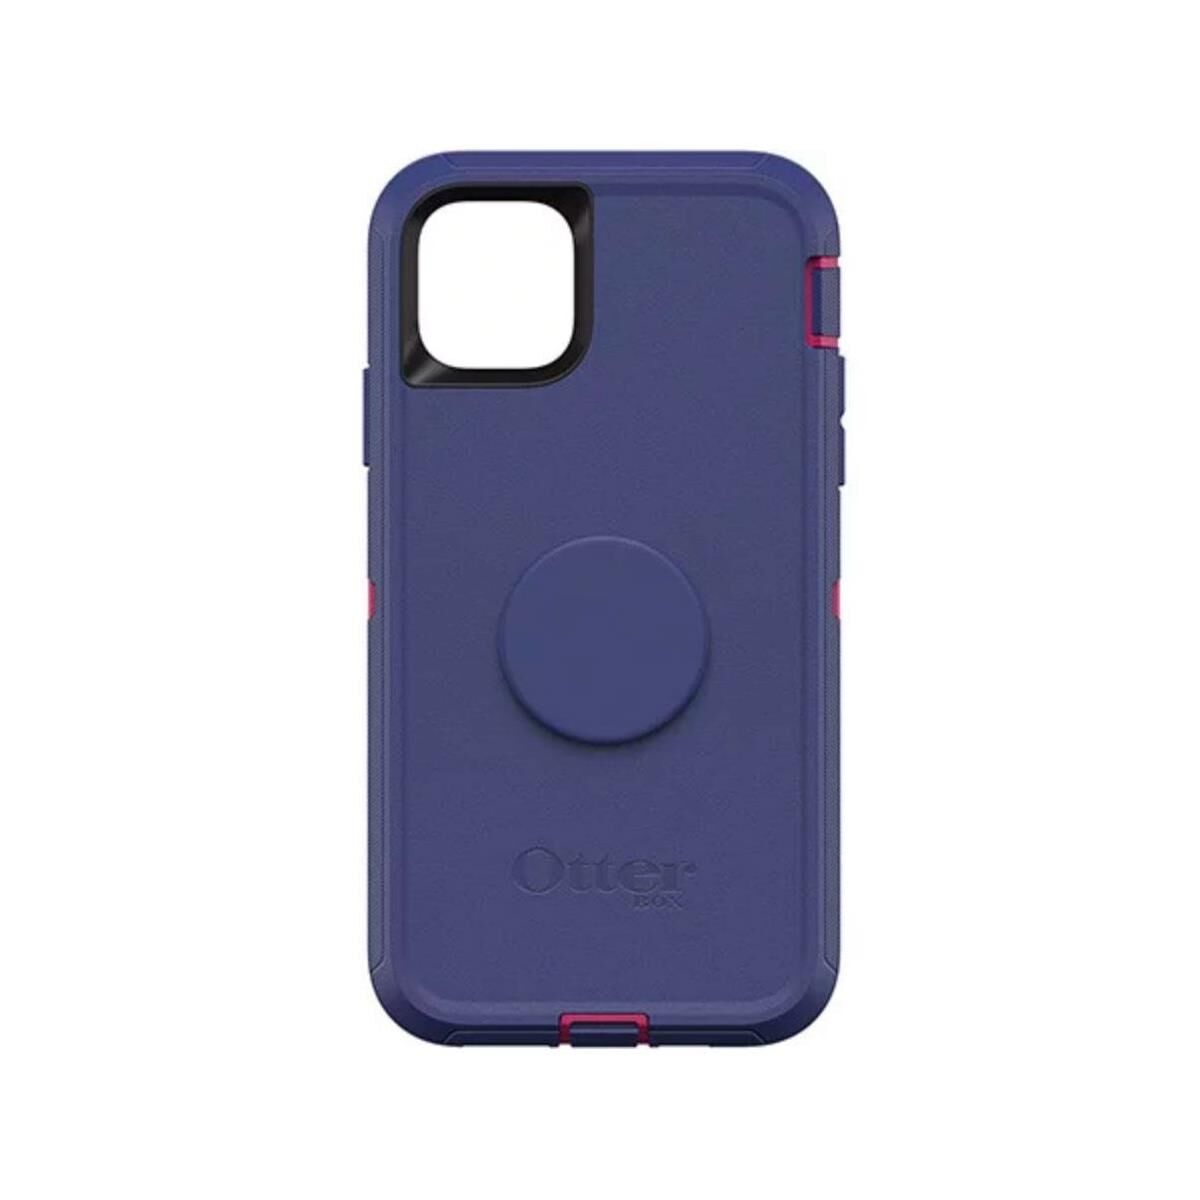 OtterBox Otter + Pop Defender Case for iPhone 11 Pro Max, Grape Jelly